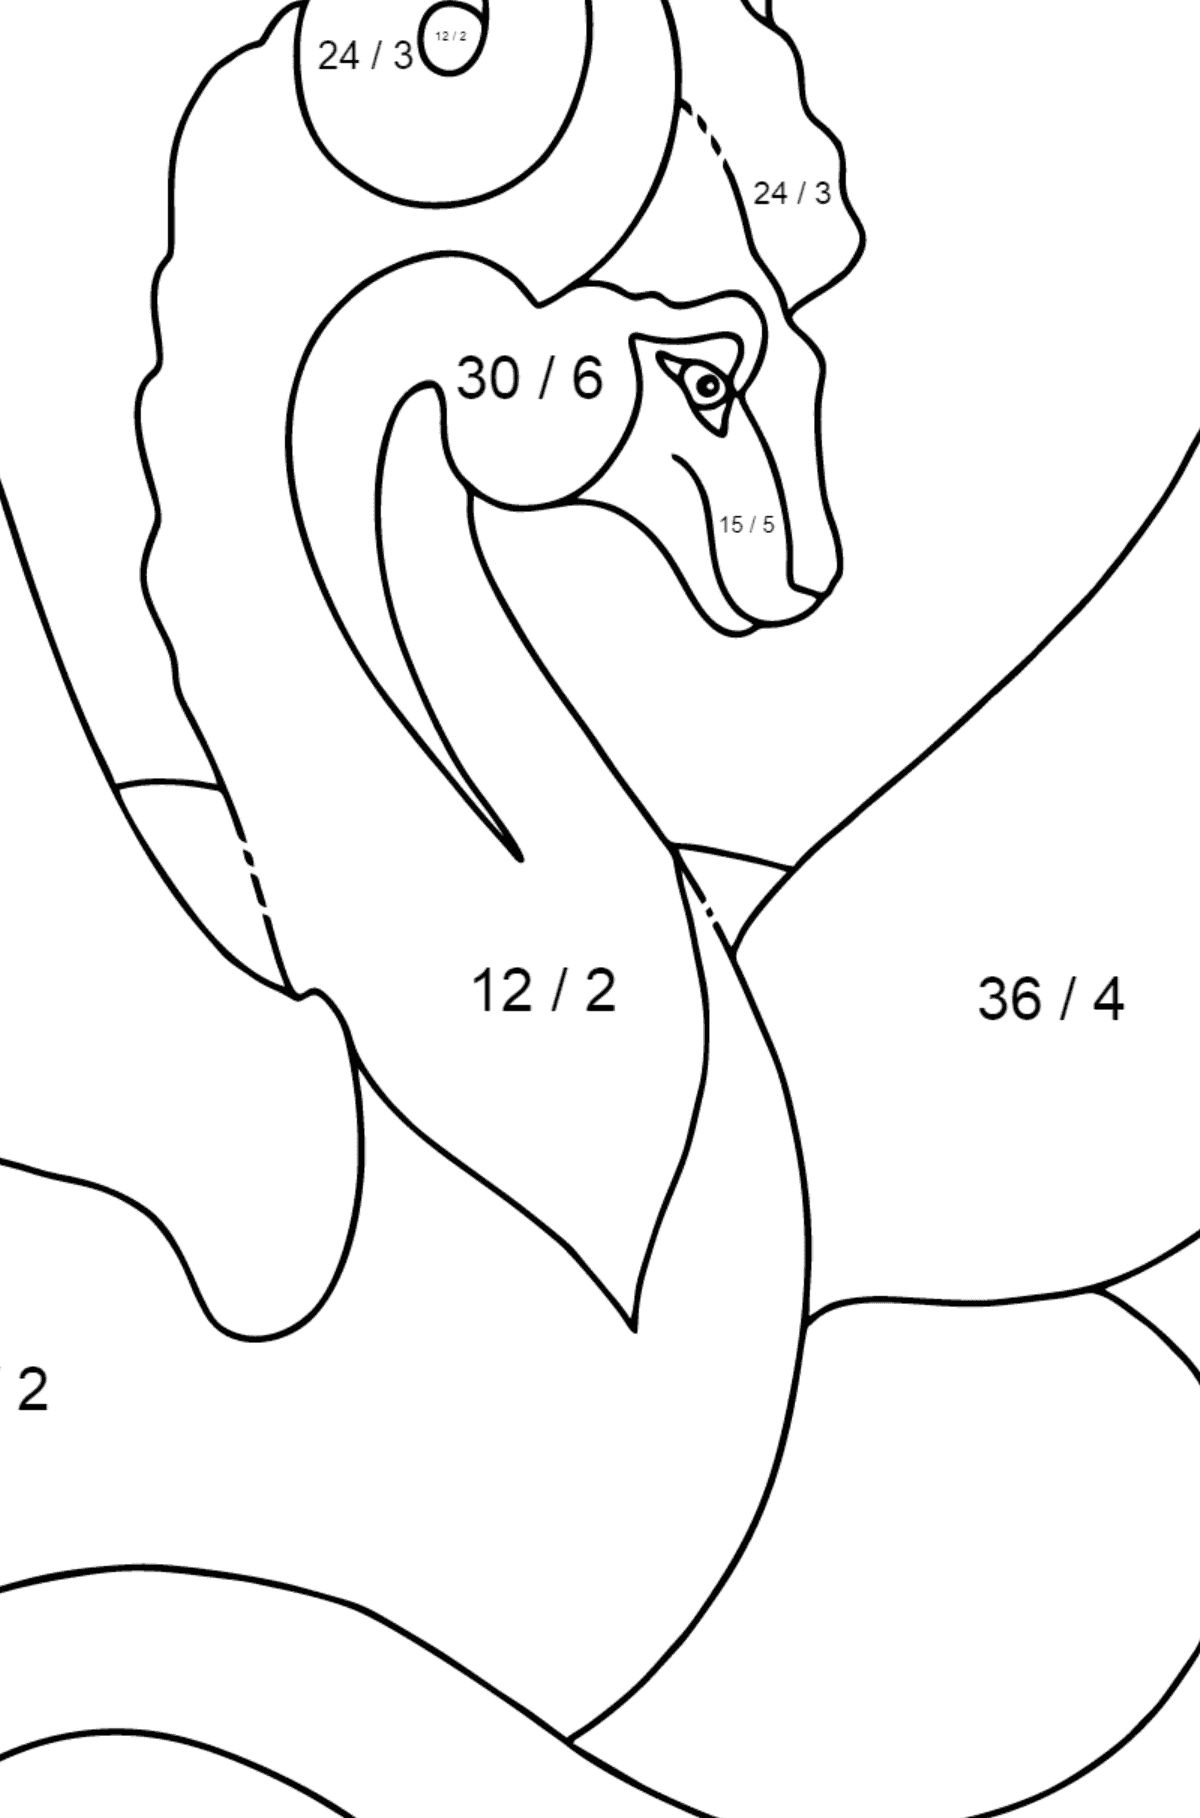 Cute Dragon Coloring Page (simple) - Math Coloring - Division for Kids